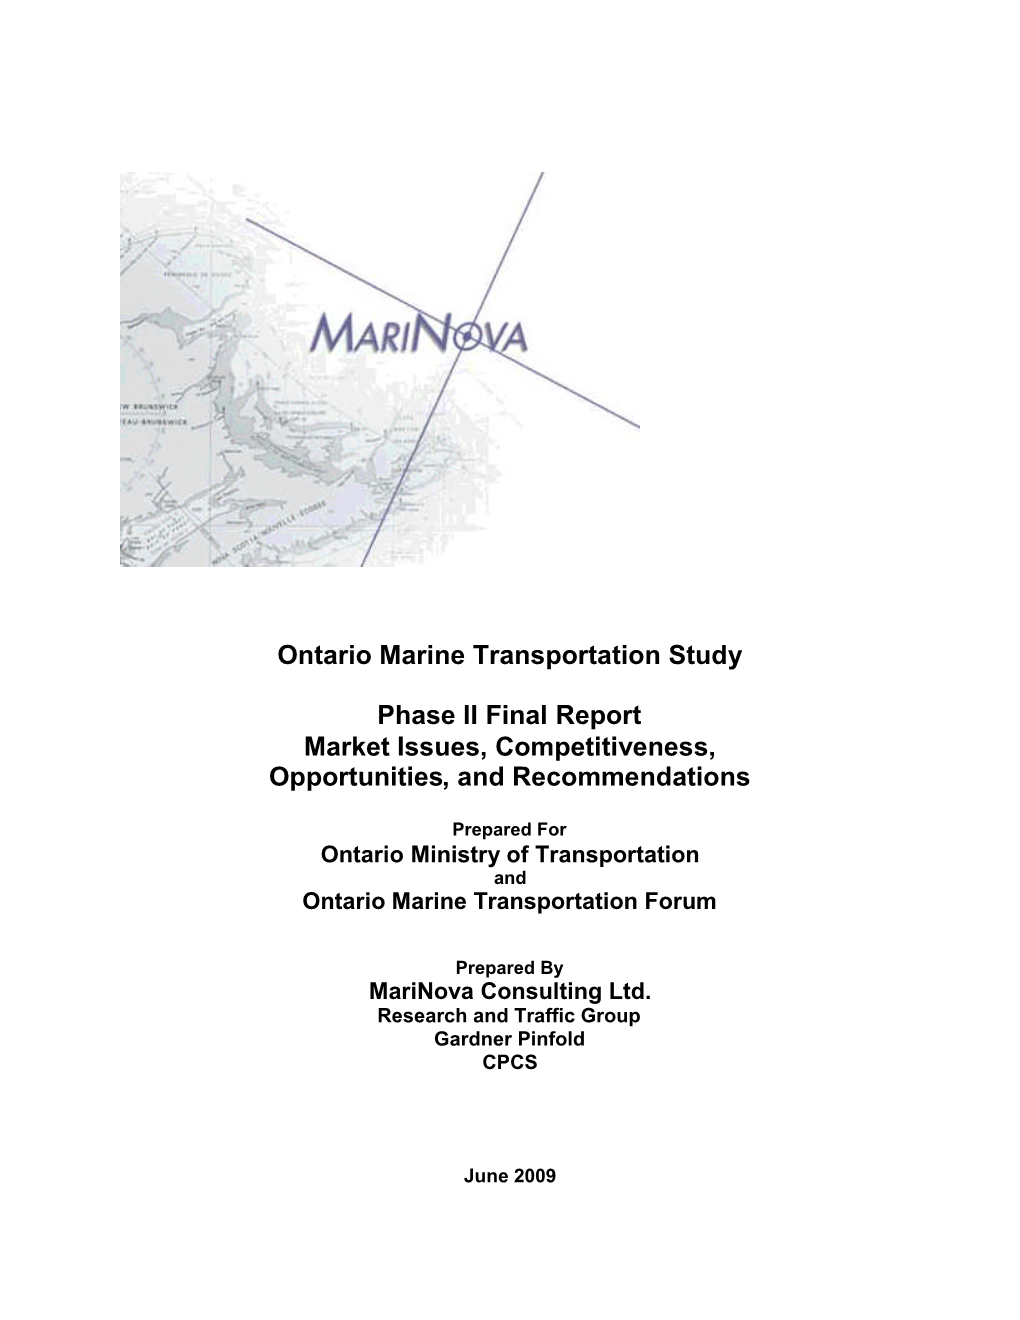 Ontario Marine Transportation Study Phase II Final Report Market Issues, Competitiveness, Opportunities, and Recommendations